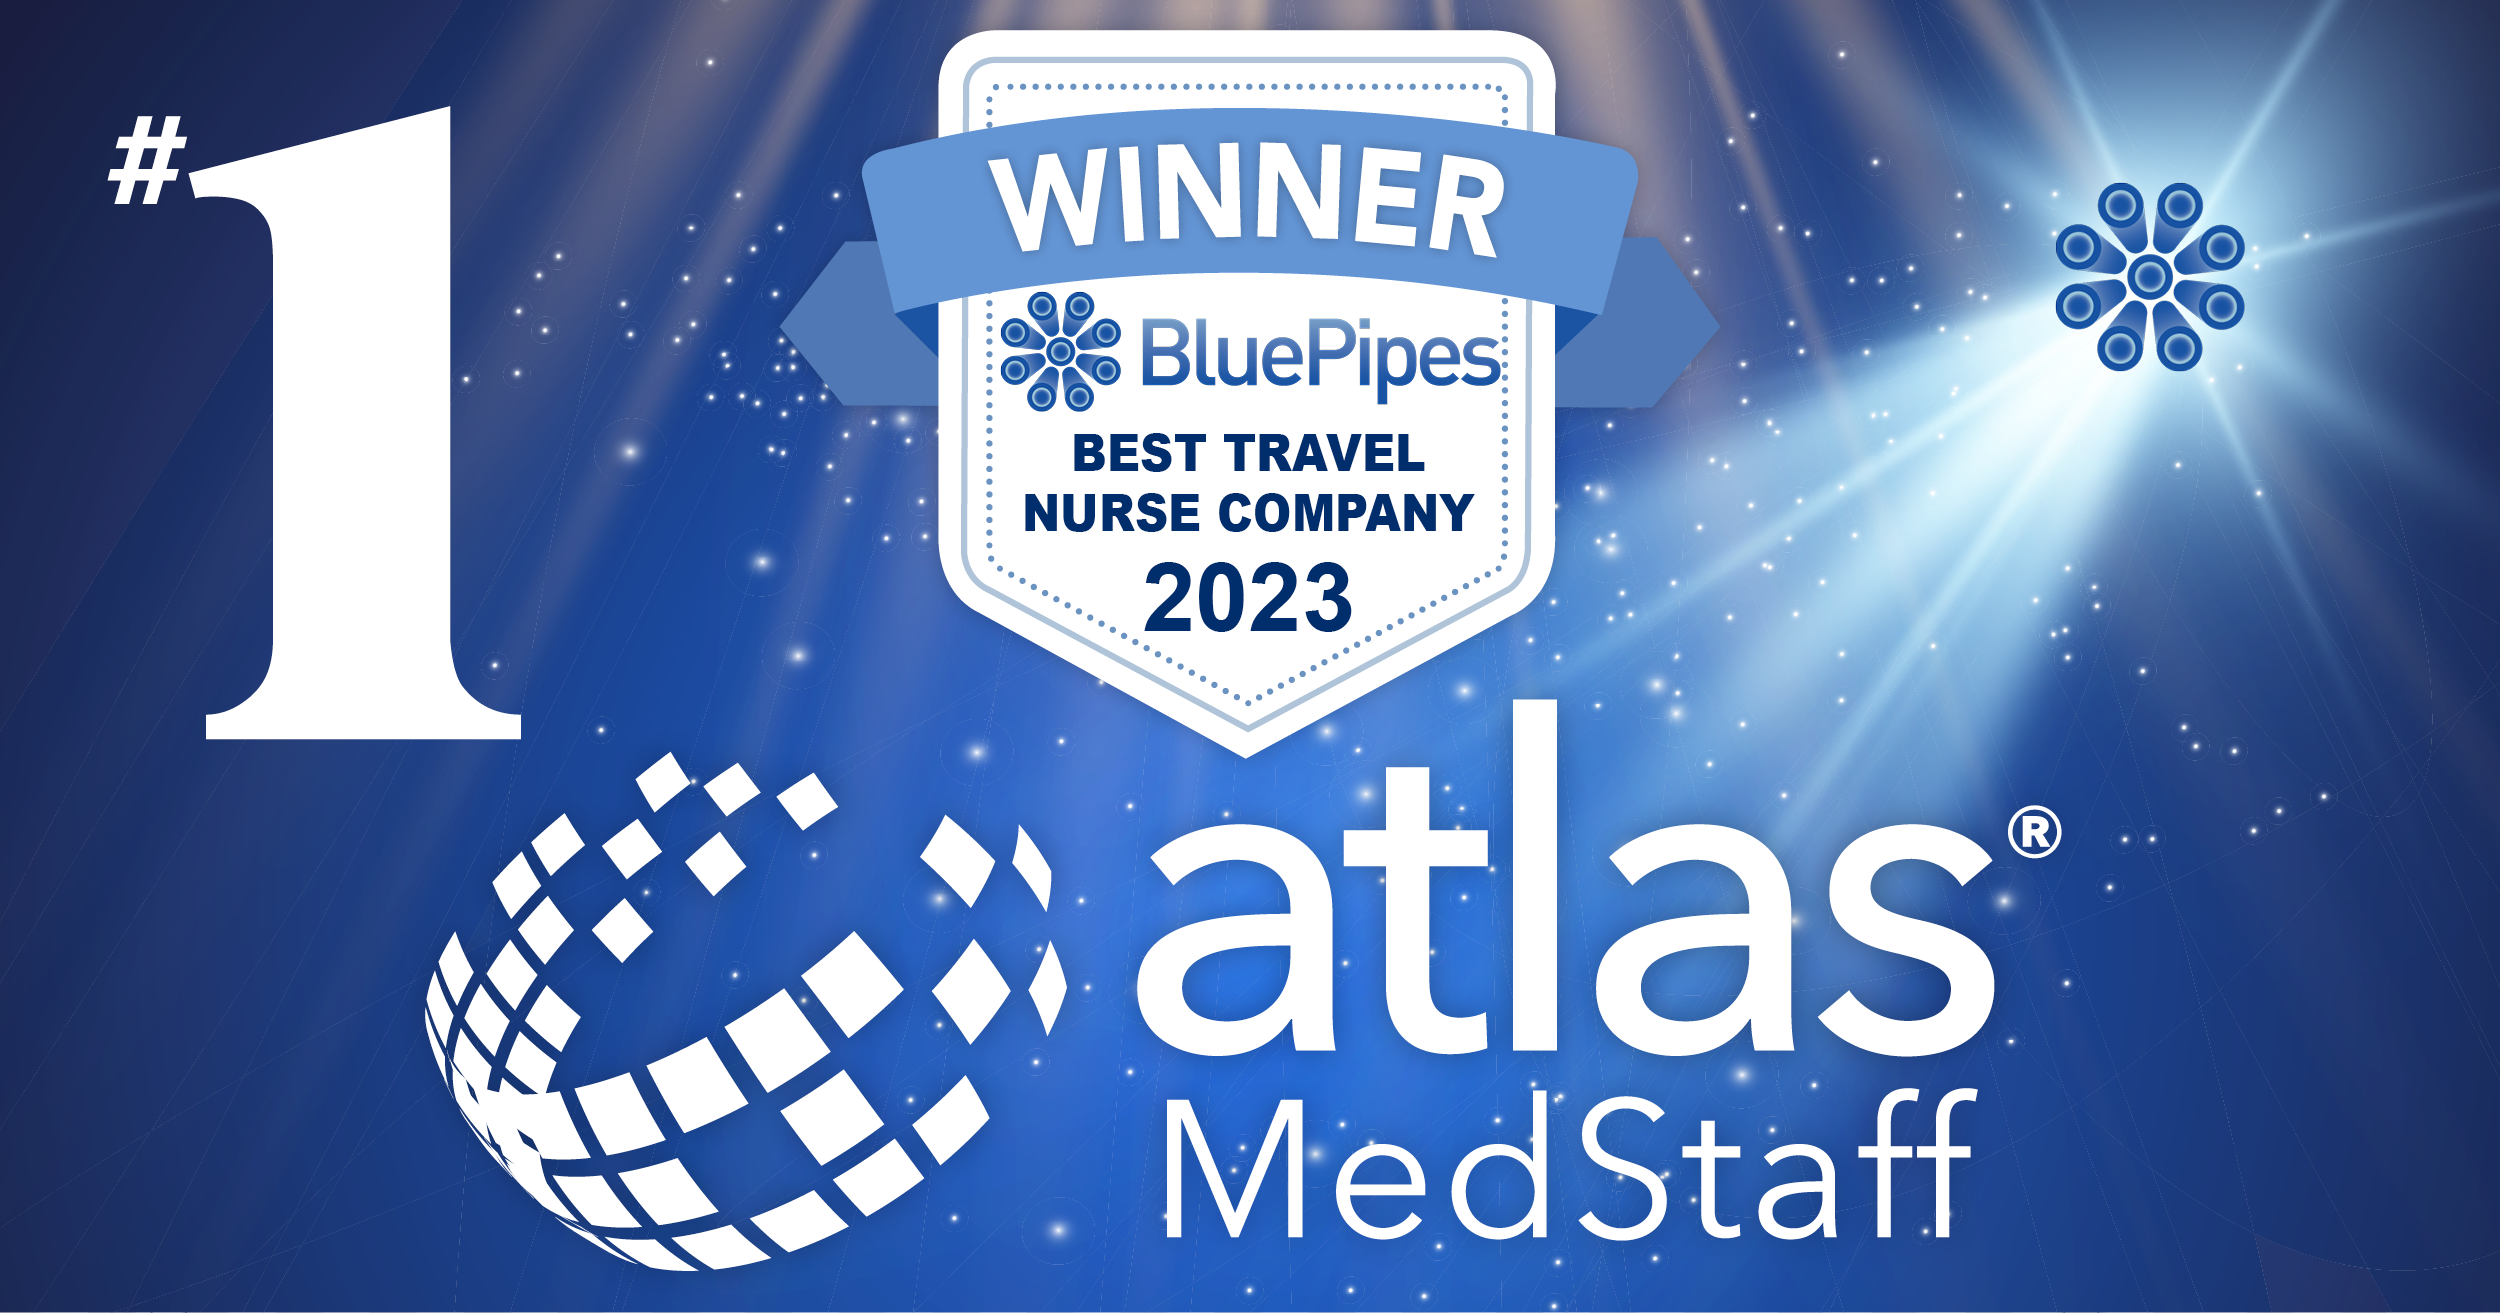 Atlas MedStaff is the highest ranked travel healthcare agency by BluePipes